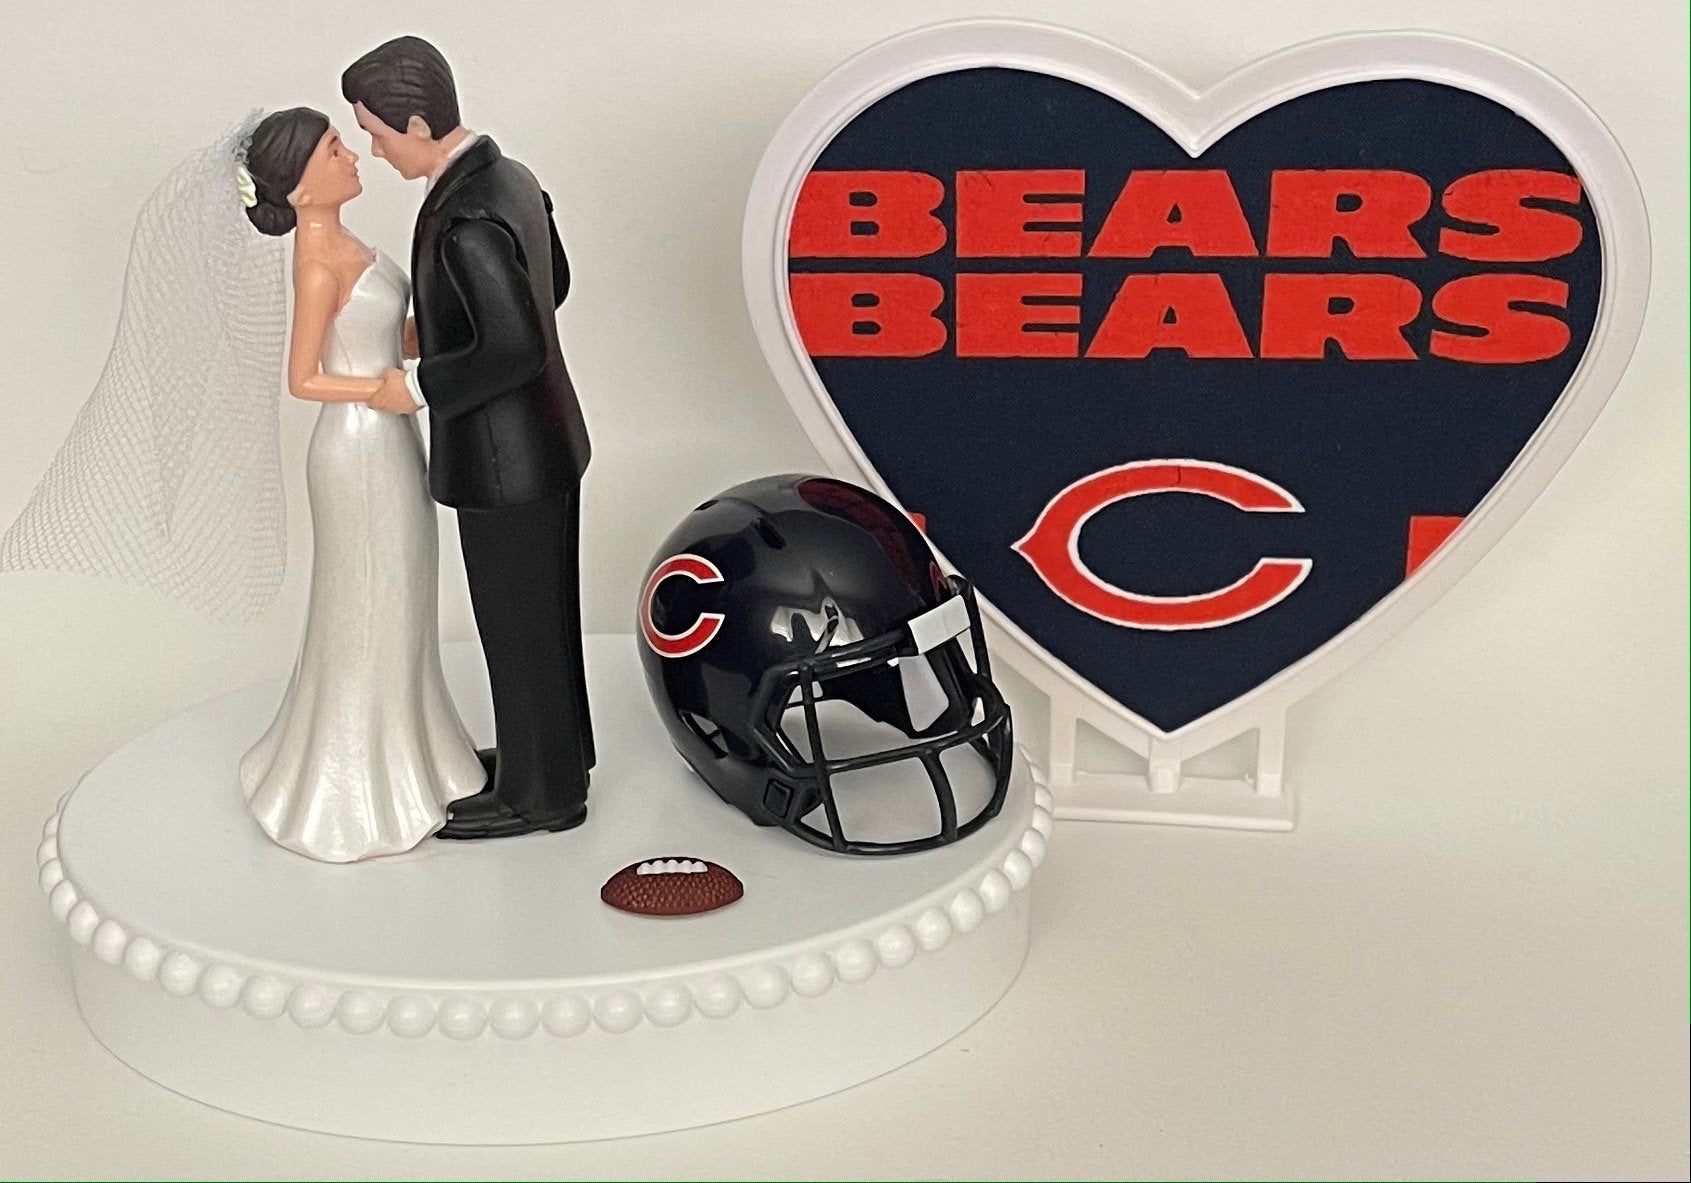 Wedding Cake Topper Chicago Bears Football Themed Beautiful Short-Haired Bride and Groom One-of-a-Kind Sports Fan Cake Top Shower Gift